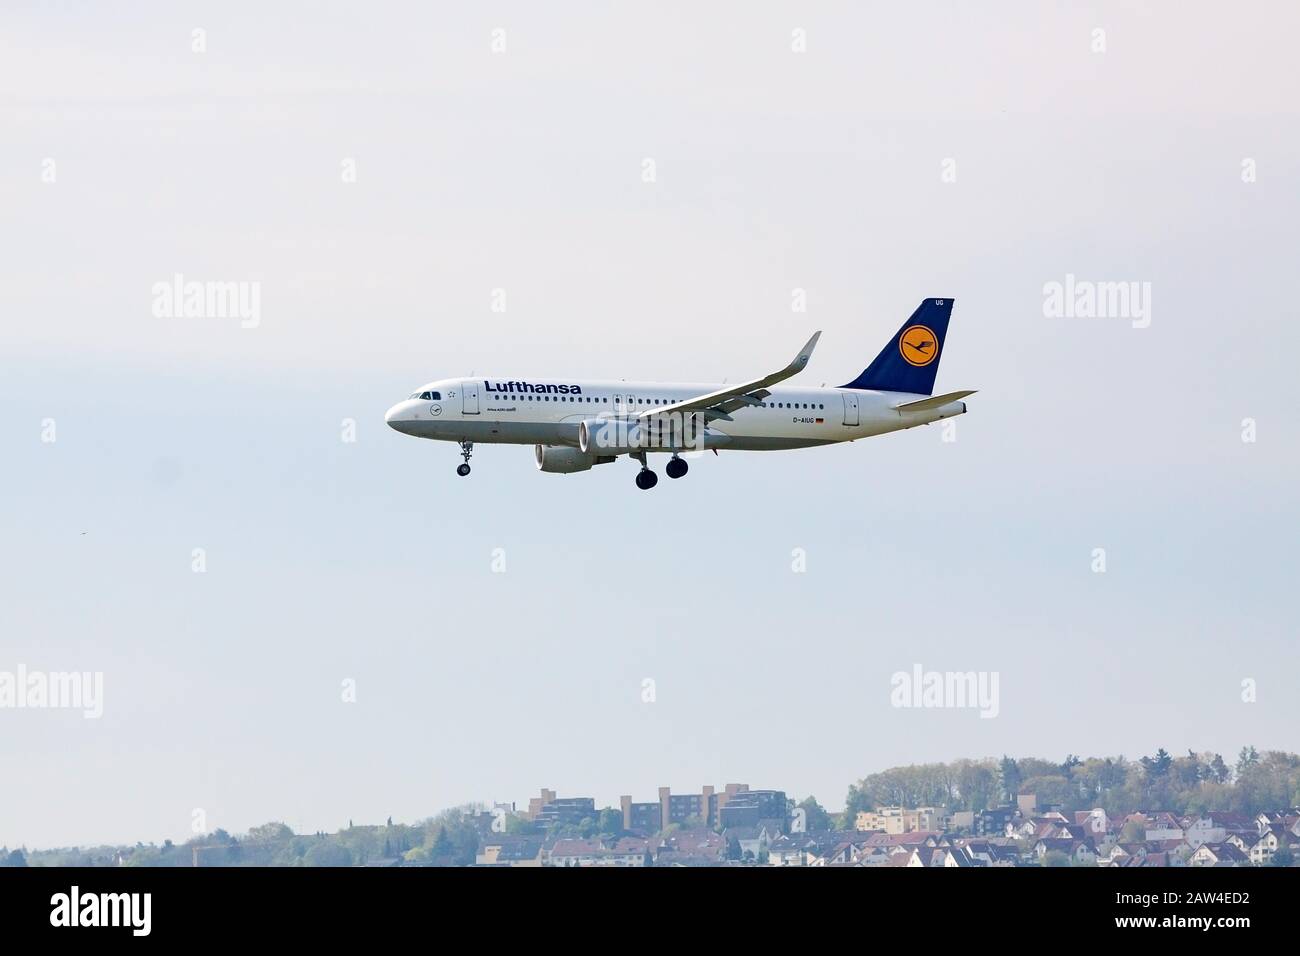 Stuttgart, Germany - May 06, 2017: Lufthansa Airlines Airbus A320-200 airplane during landing at airport Stuttgart Stock Photo